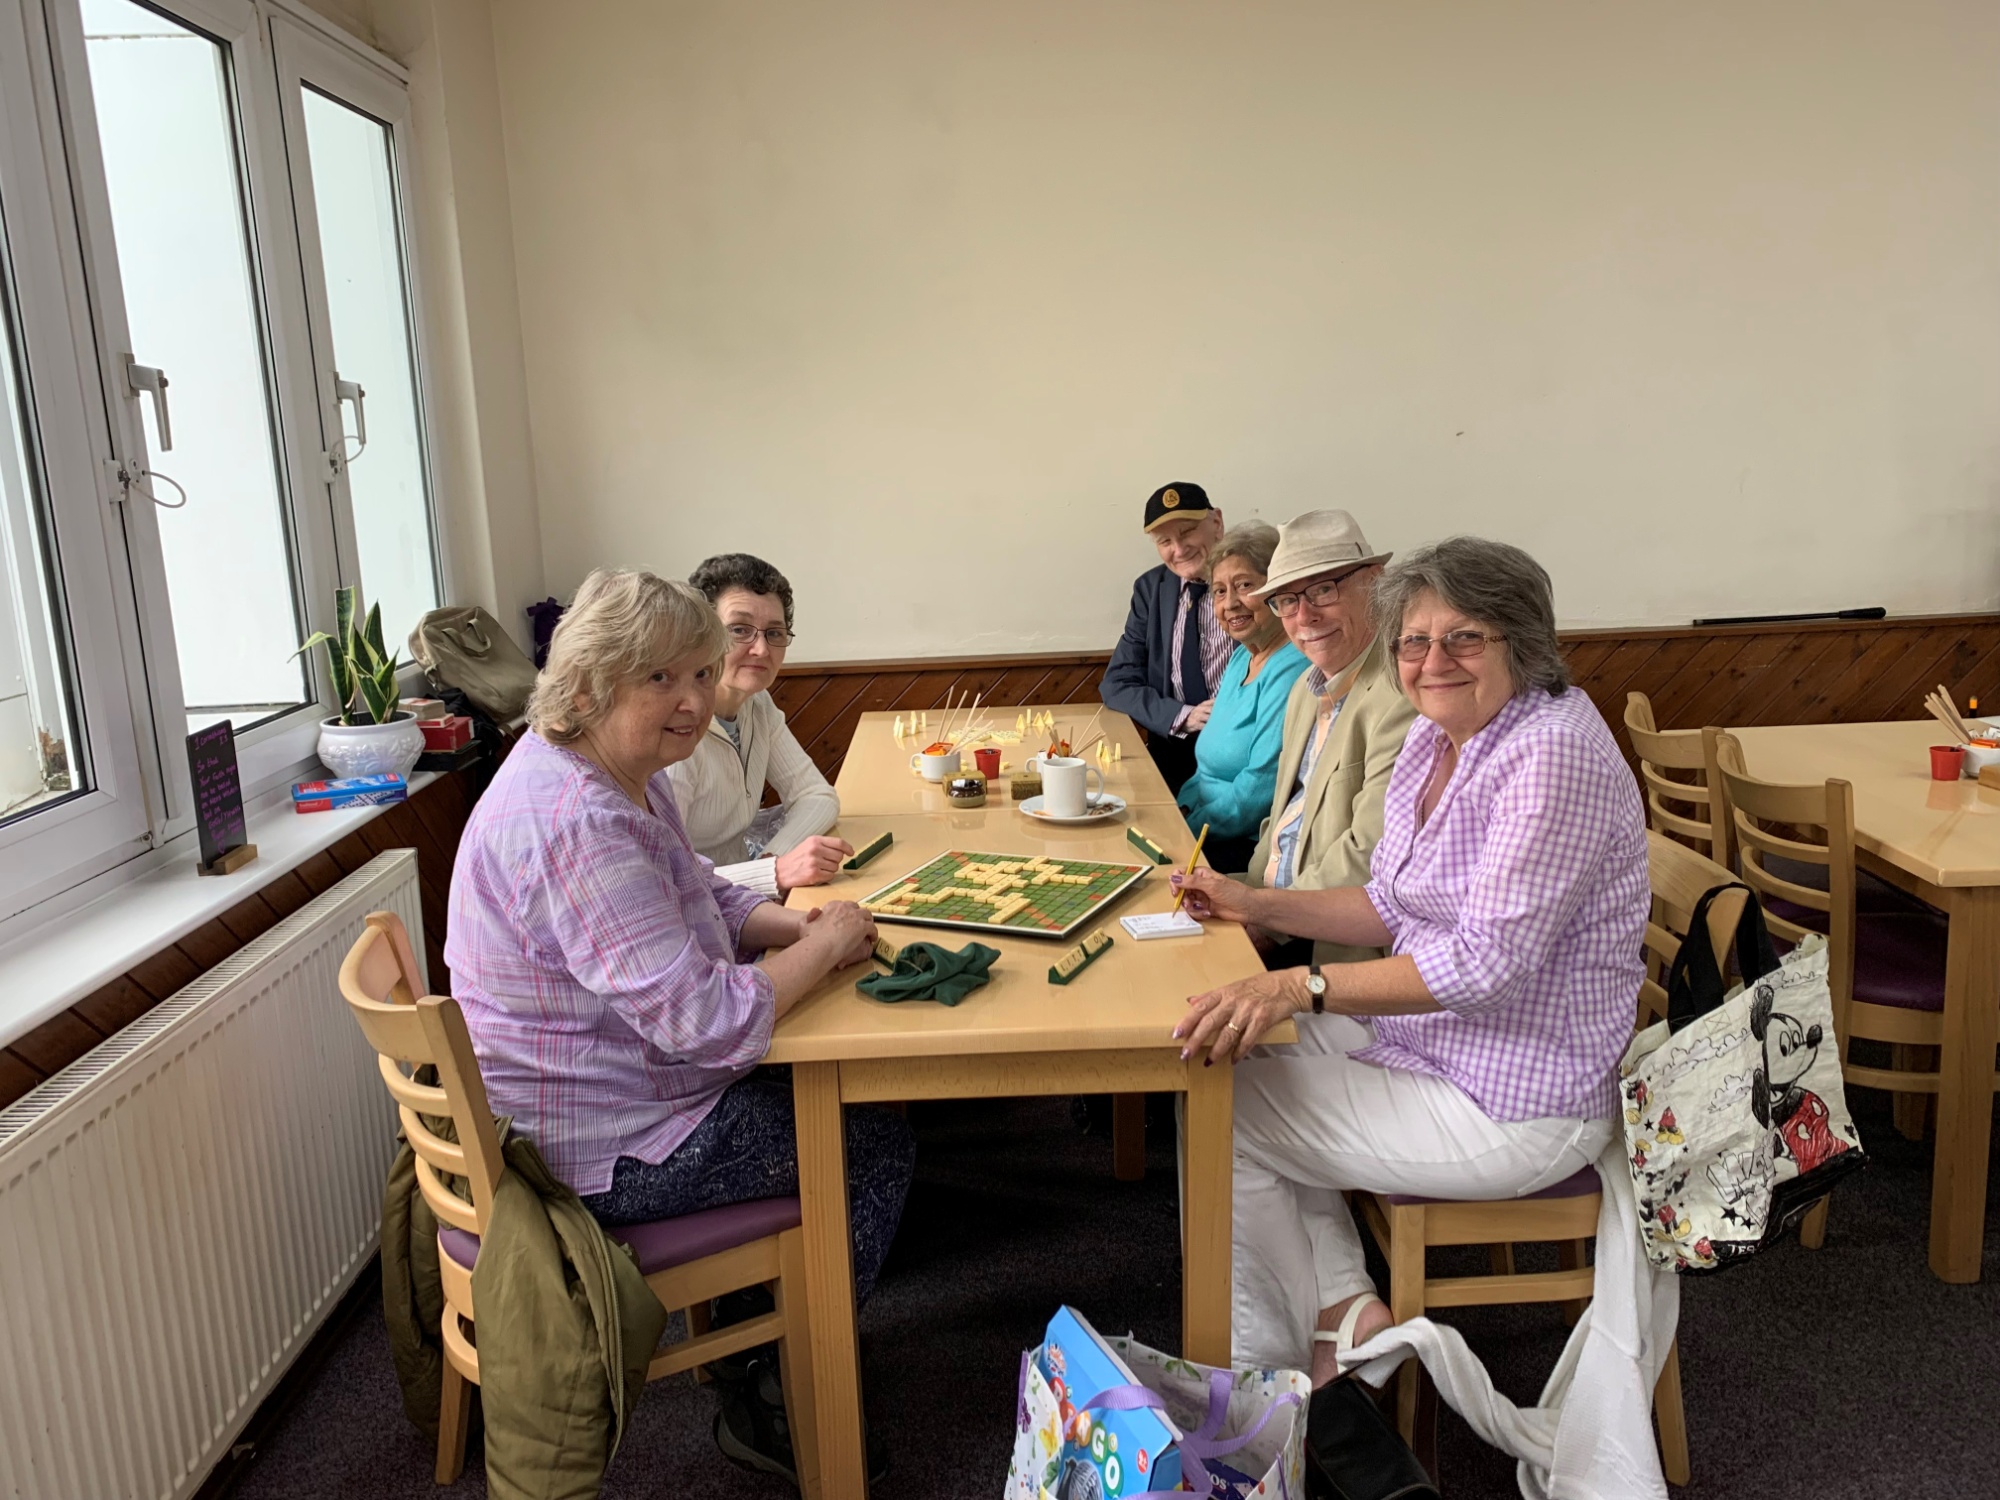 A group of 6 sit around a rectangular table playing board games